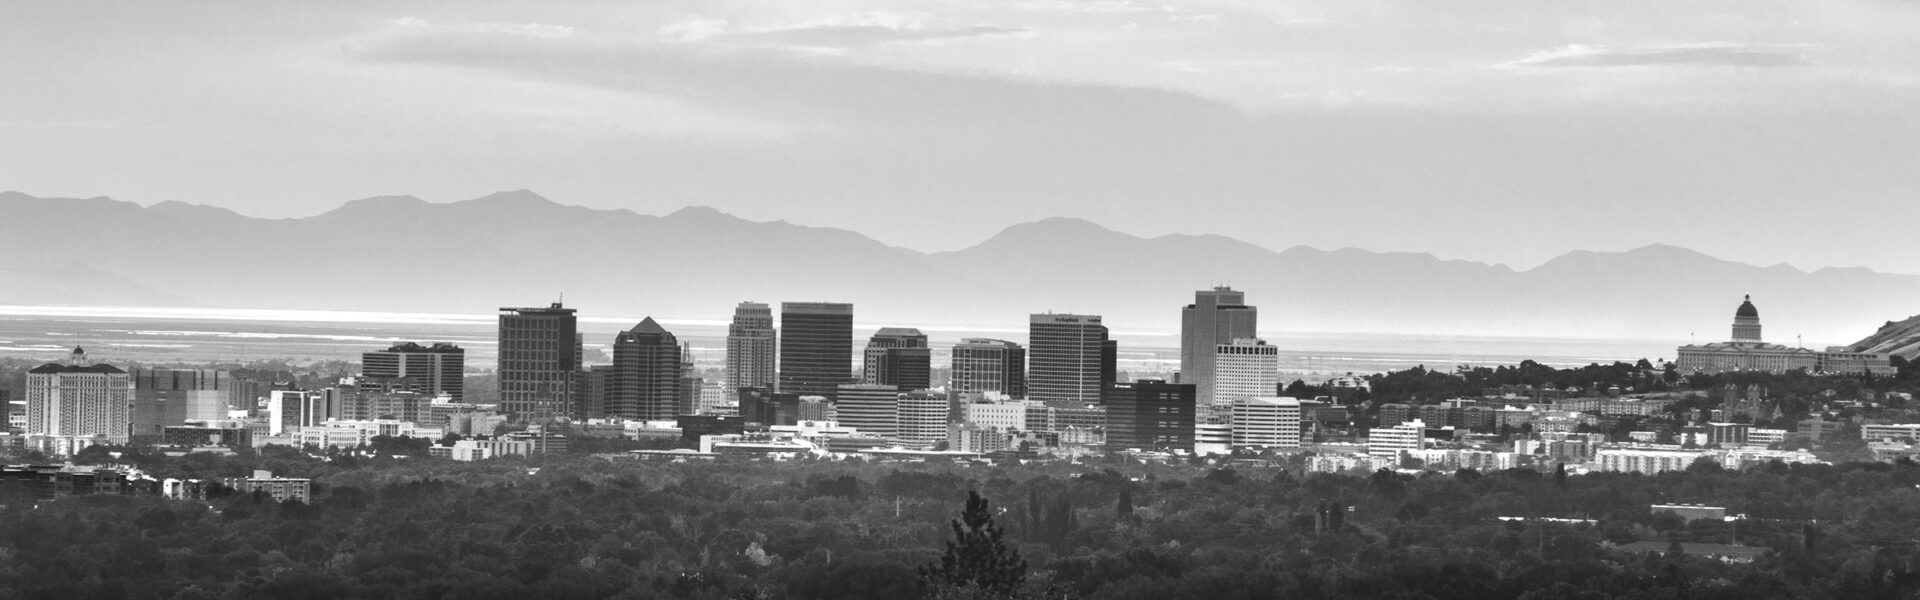 Black and white photograph of Salt Lake City, Utah with mountains and clouds behind it.